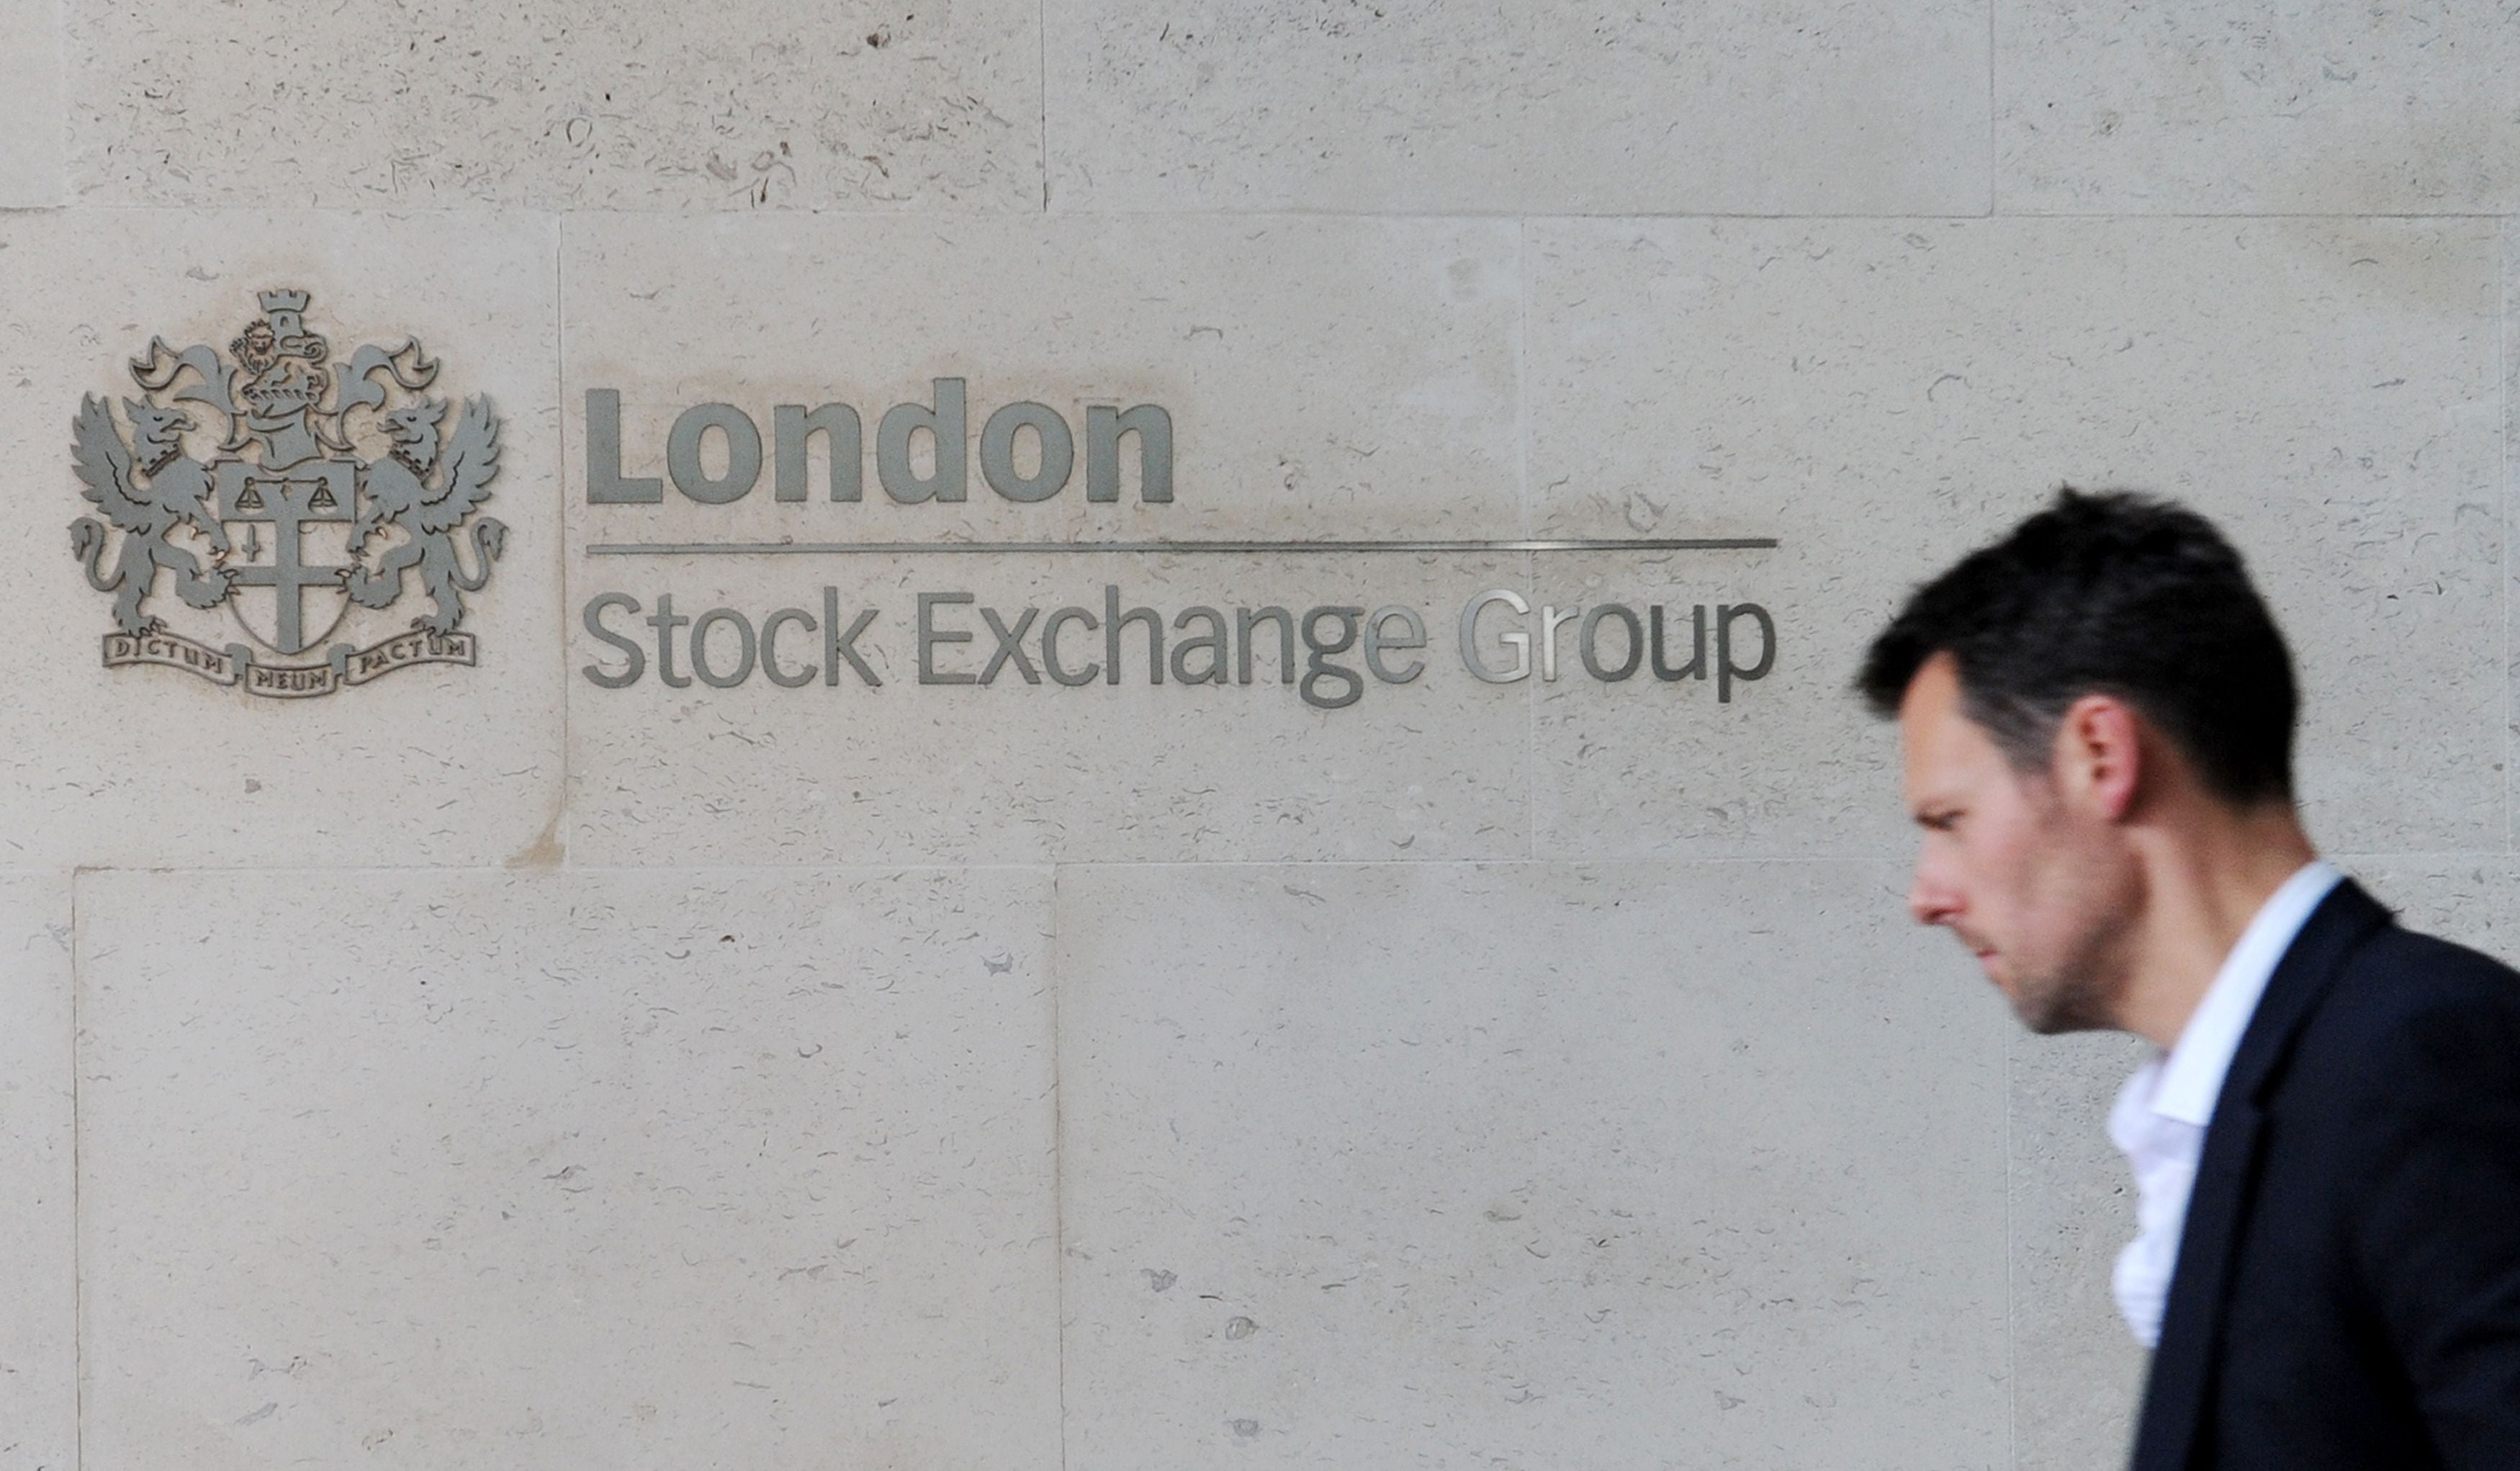 London Stock Exchange Group said it has suspended 28 listings with links to Russia from its markets after sanctions were introduced following the invasion of Ukraine (Nick Ansell/PA)